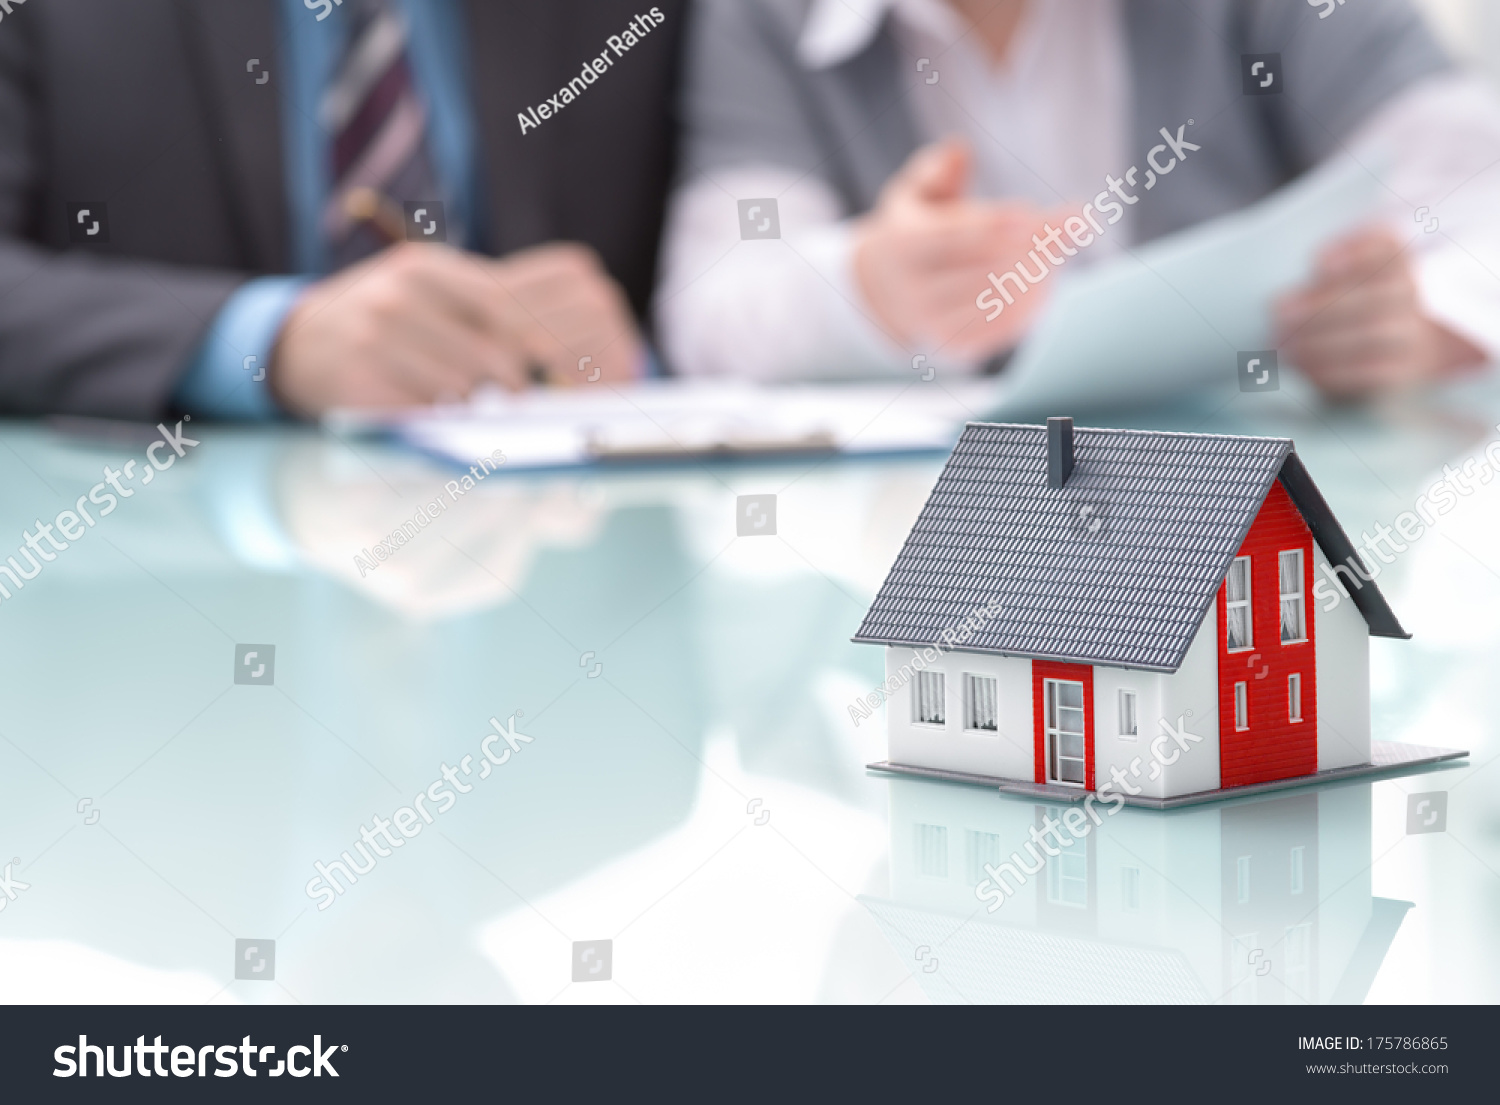 Businessman signs contract behind home architectural model #175786865